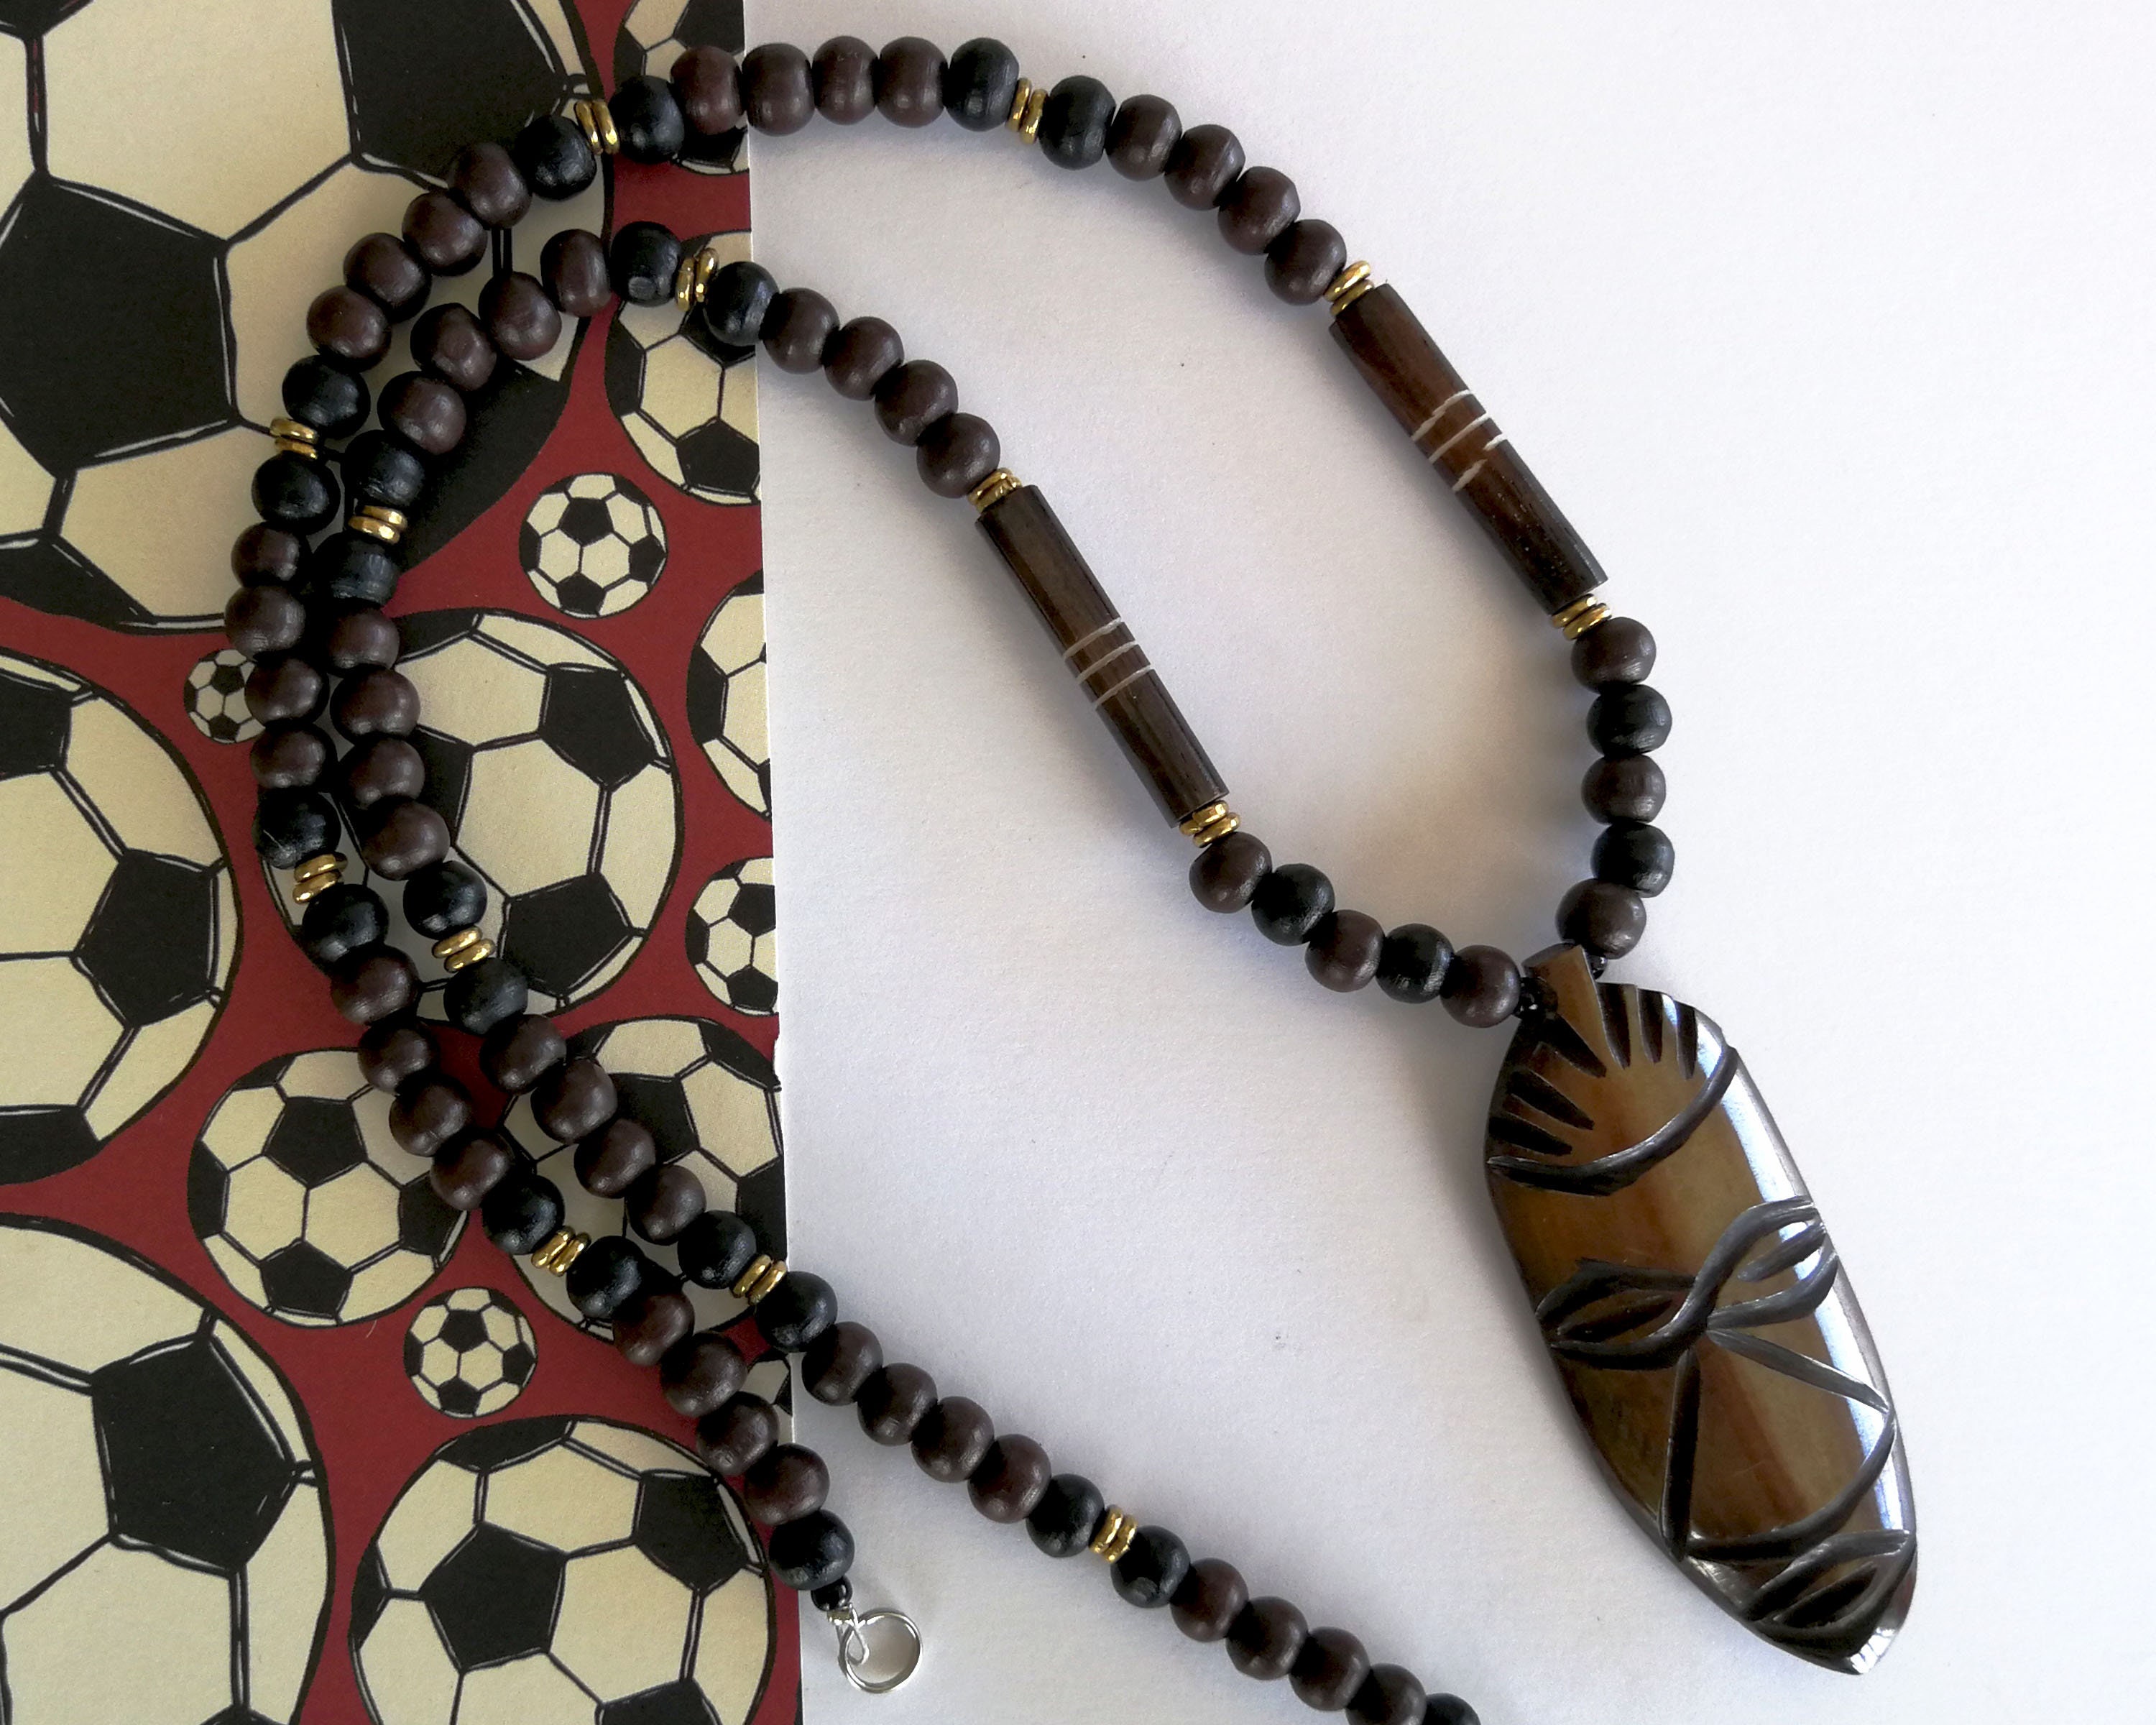 Buy Beaded Necklace for Men, Beaded Ethnic Necklace, Gemstone Necklace for  Men, Wood Necklace for Men, African Gifts for Men Online in India - Etsy